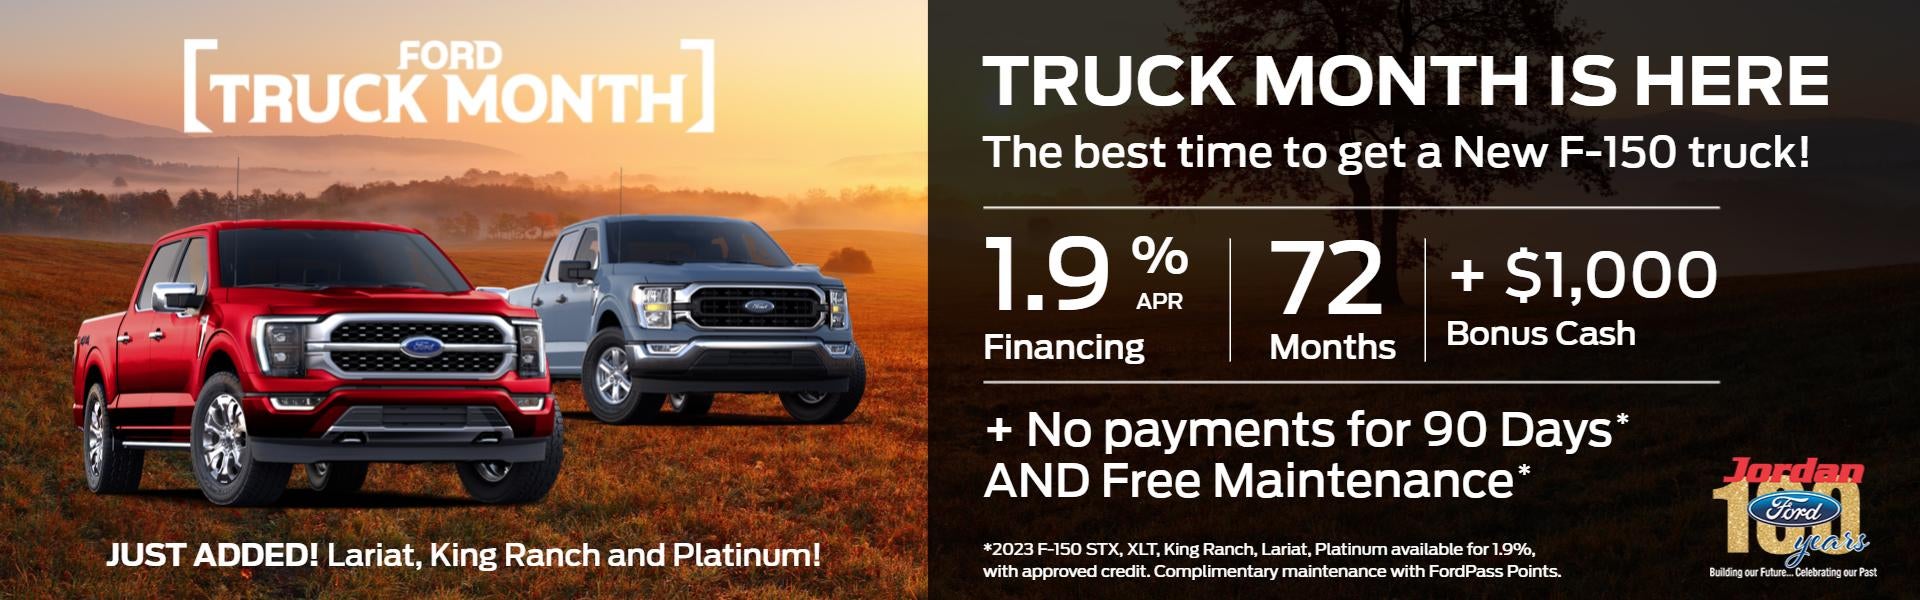 Truck Month 1.9% for 72 months available